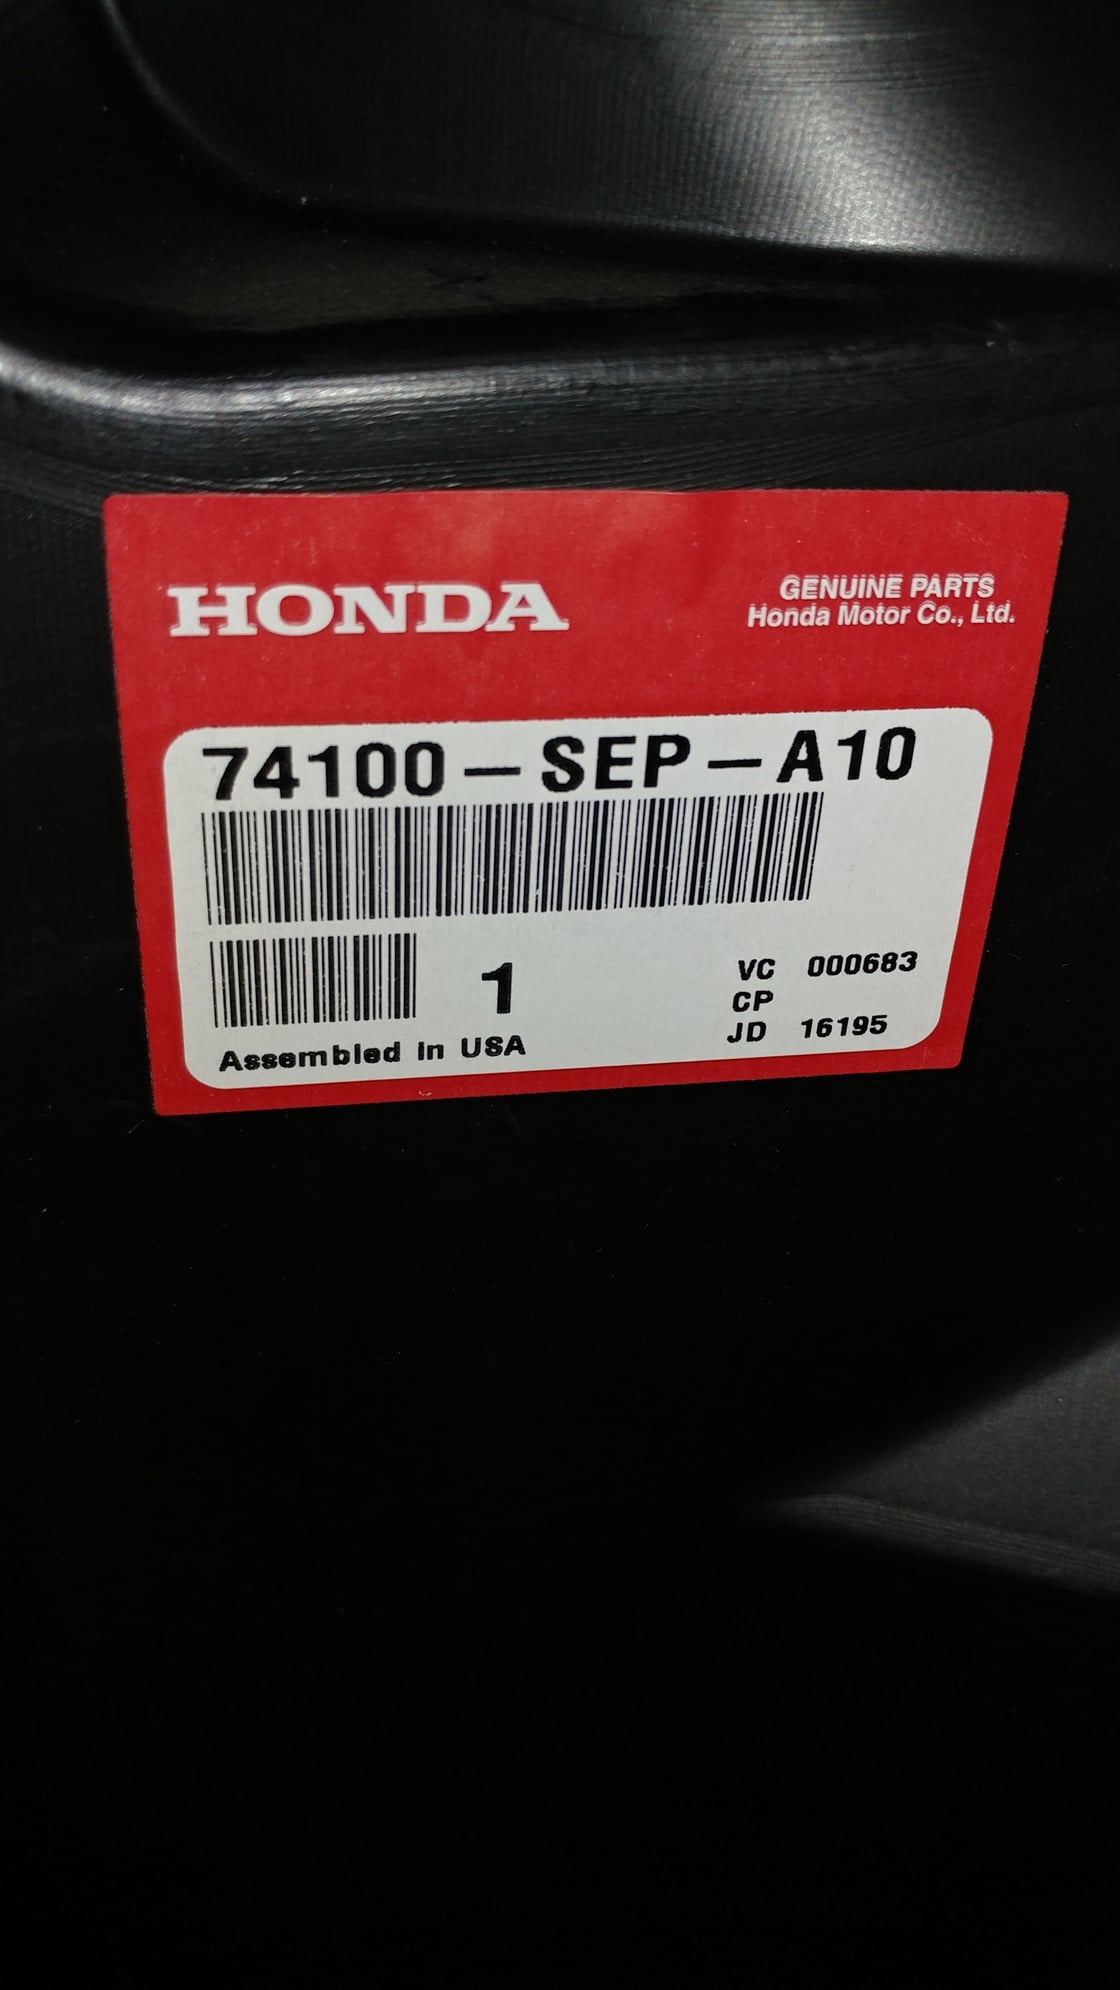 2008 Acura TL - Acura Part No.: 74100-SEP-A10 Fender Assy., R. FR. (Inner) - Exterior Body Parts - $32 - Houston, TX 77584, United States